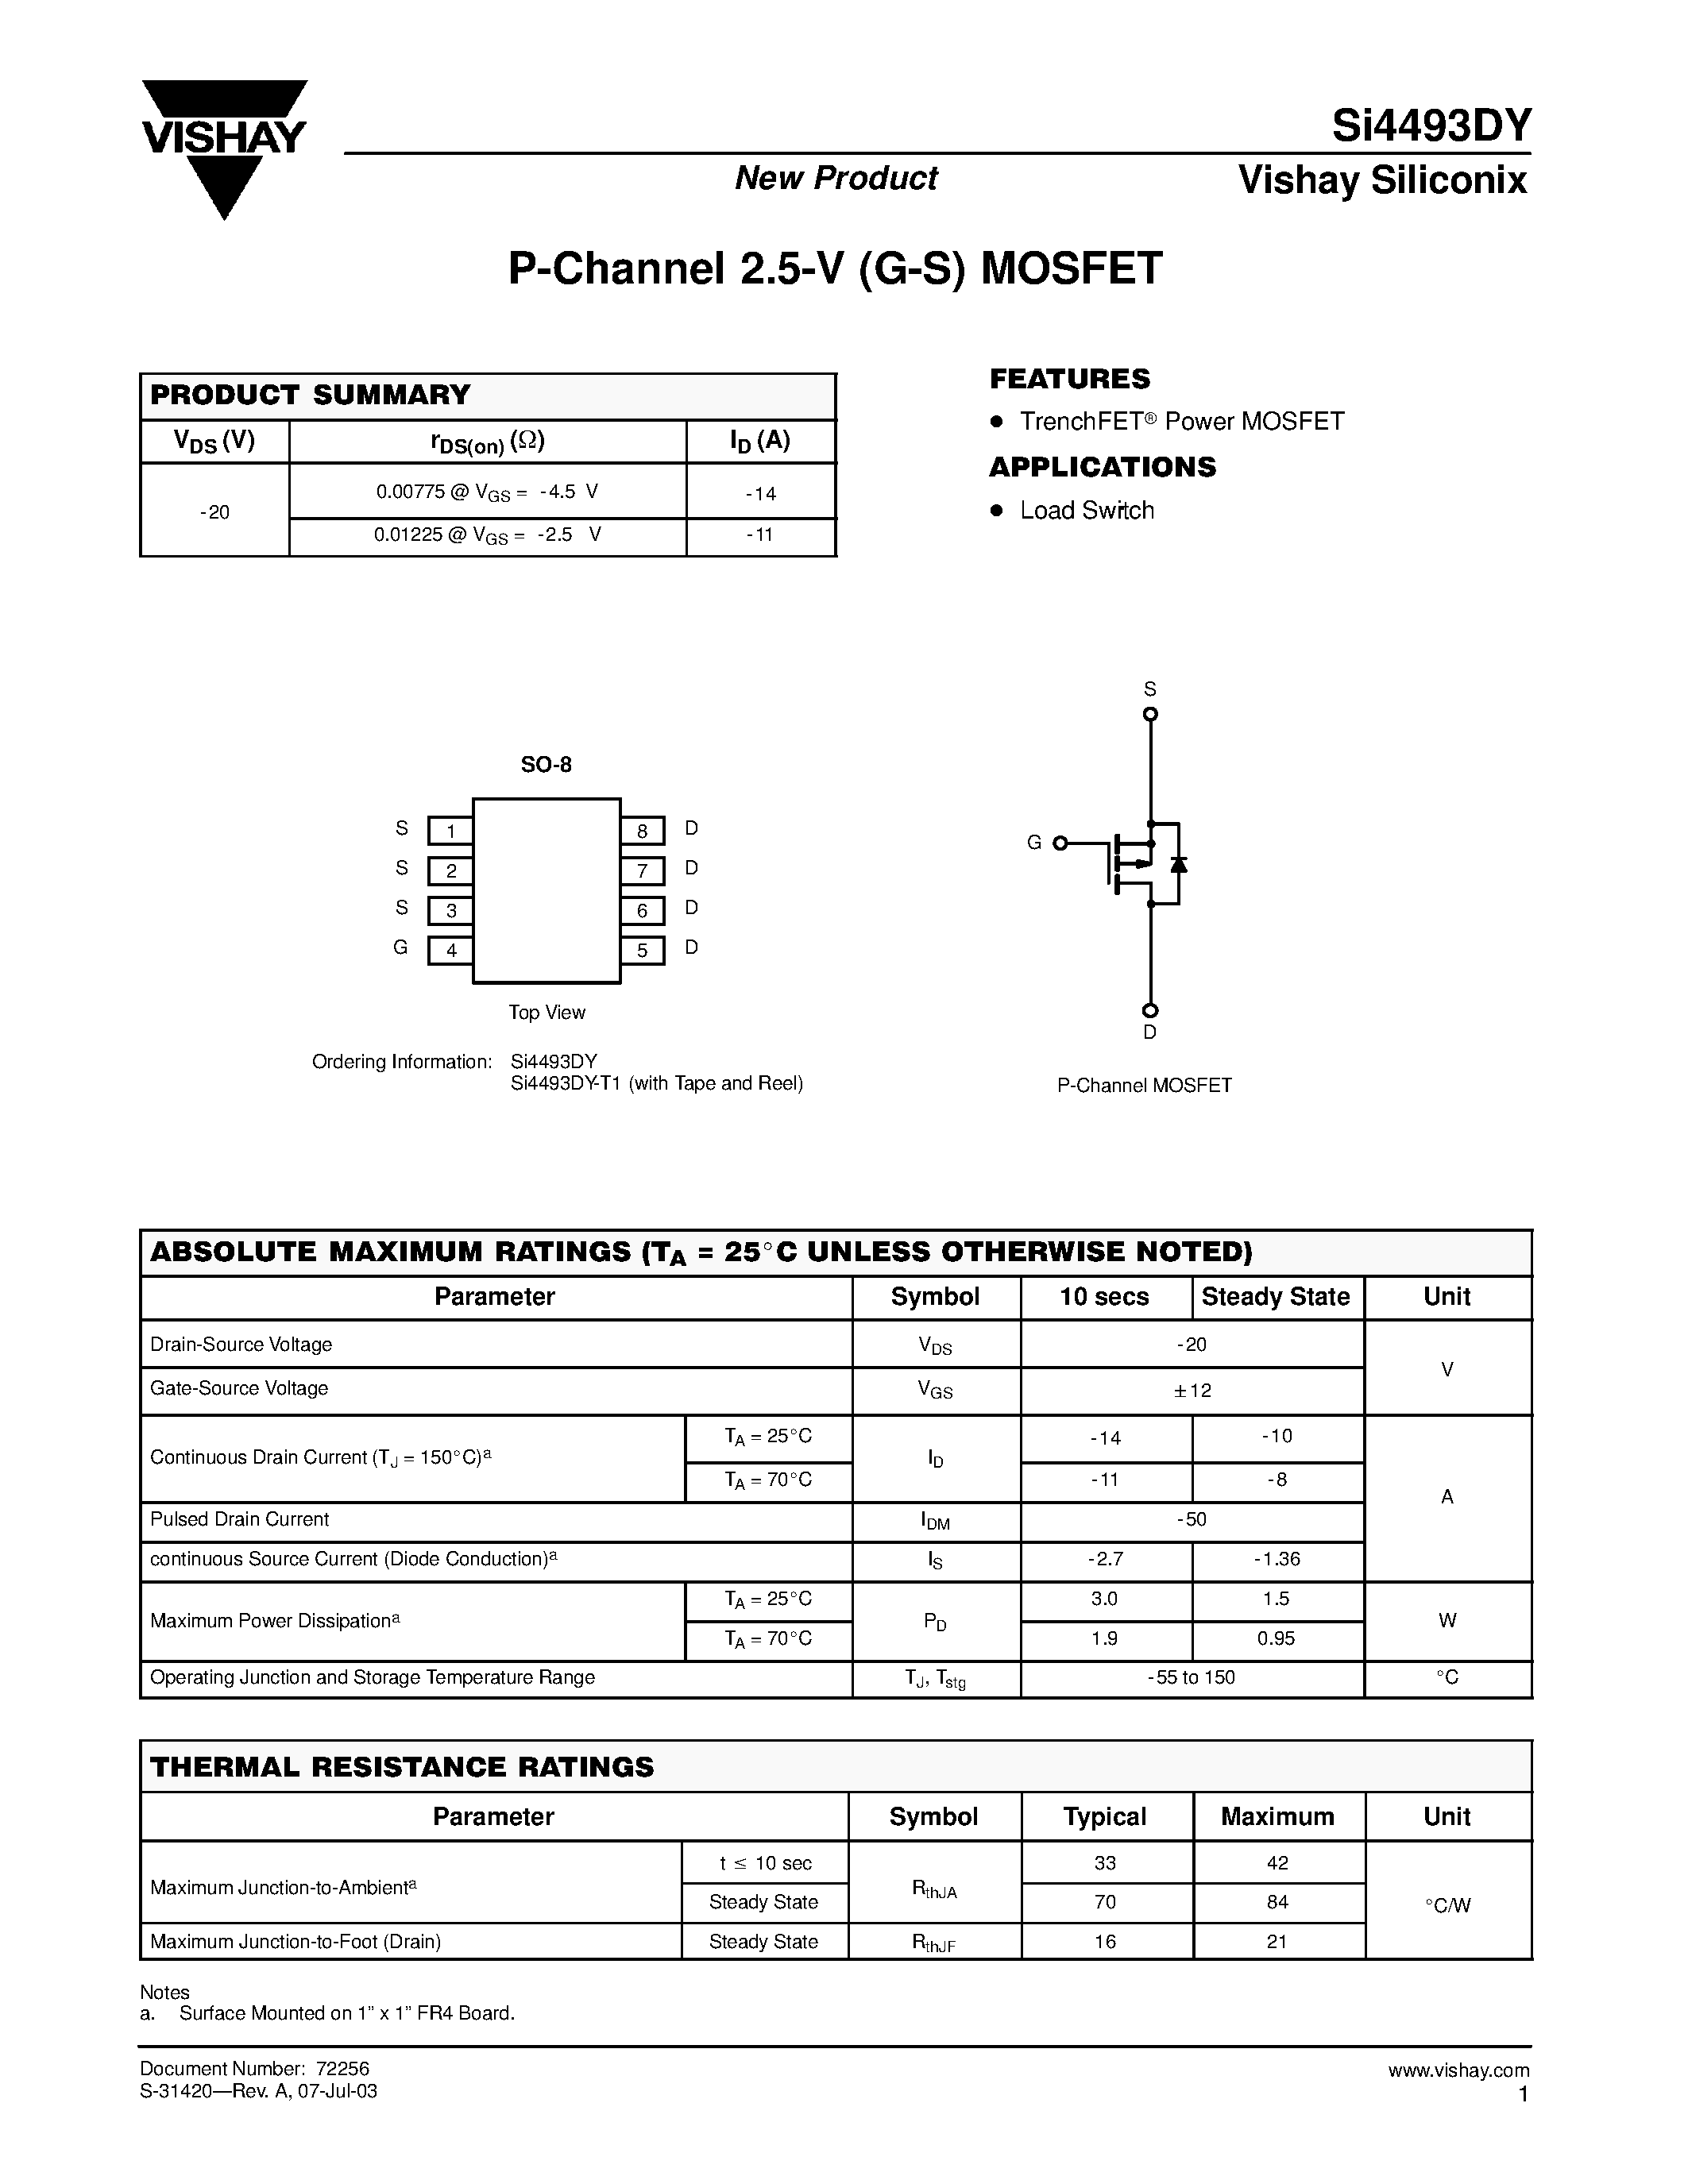 Datasheet SI4493DY - P-Channel 2.5-V (G-S) MOSFET page 1